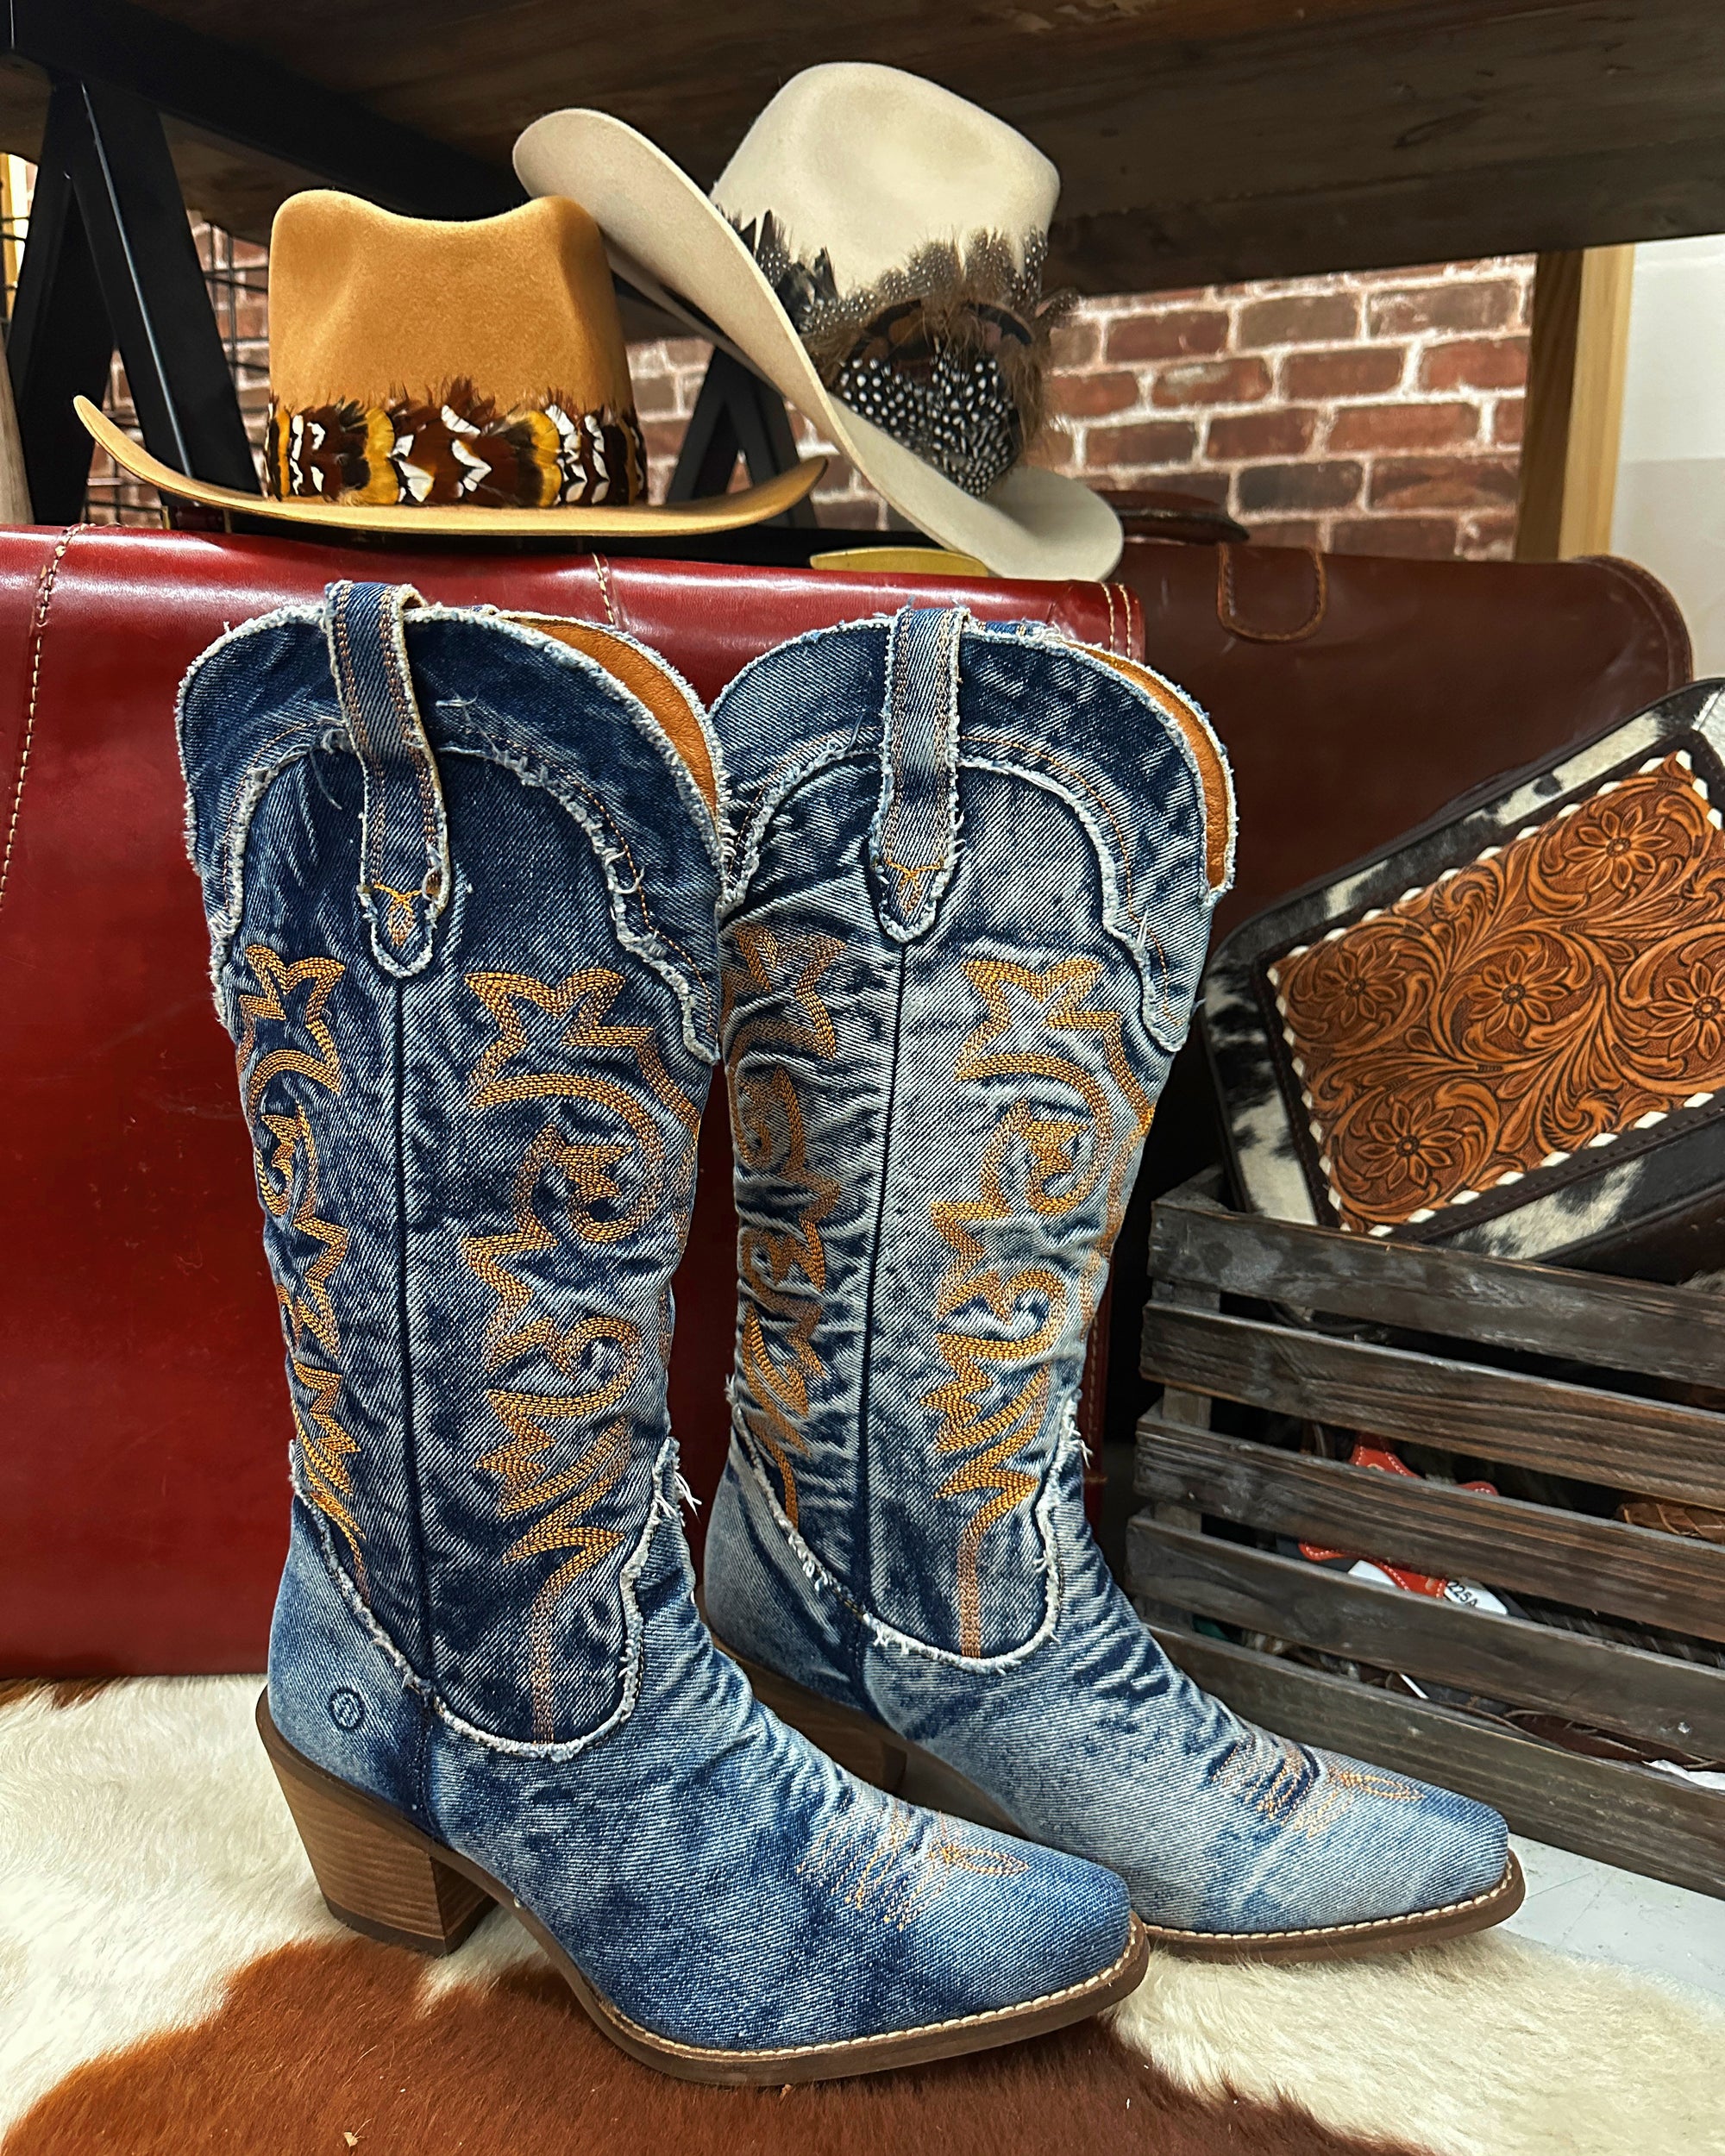 Texas Tornado Distressed Denim Embroidered Knee High Boots (DS)